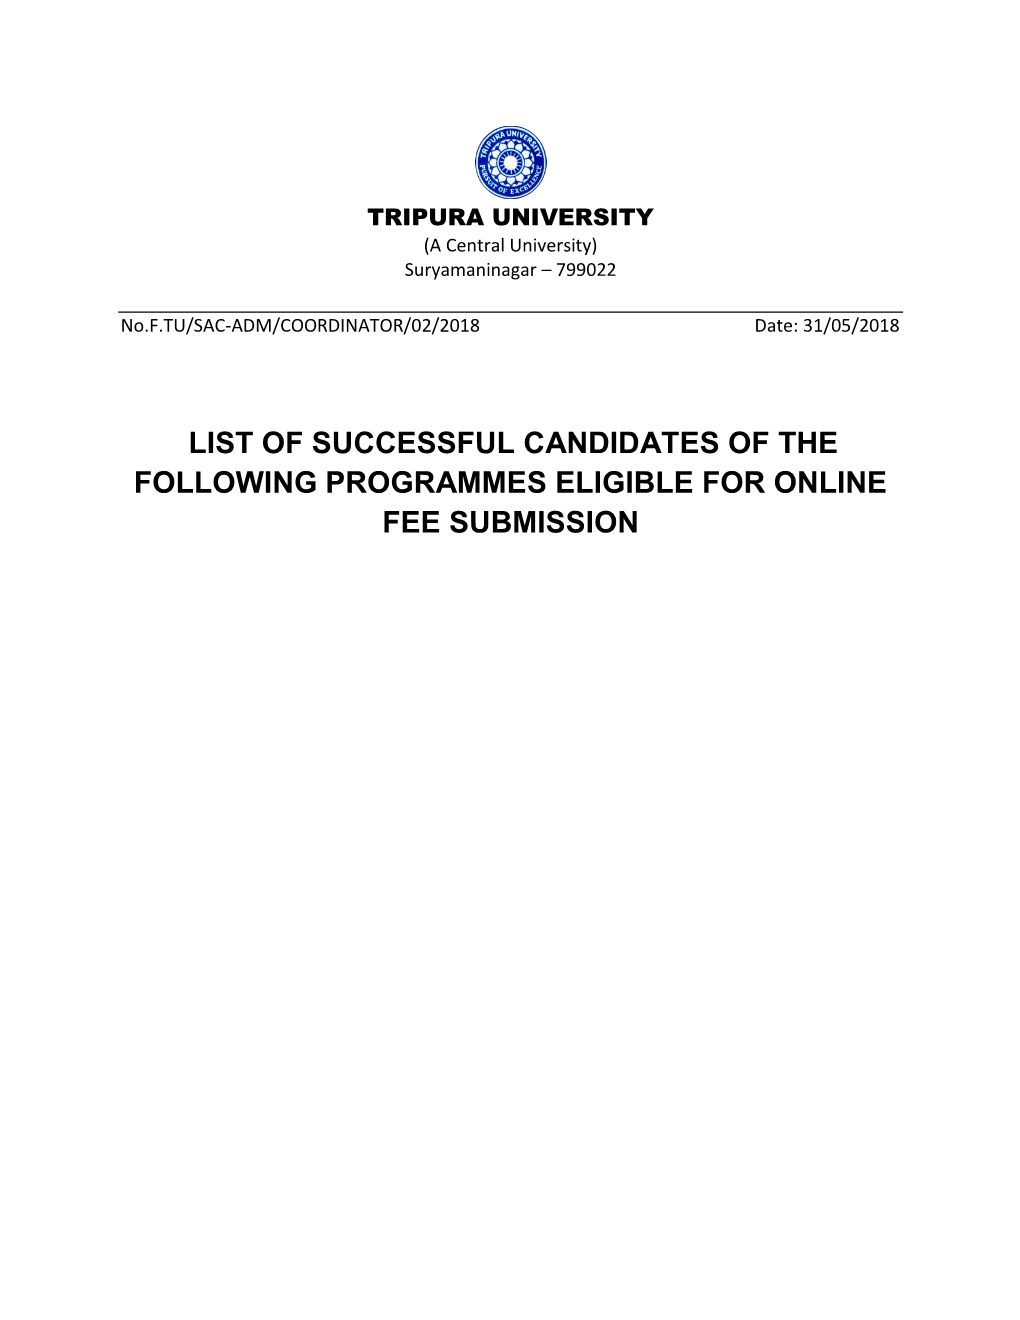 List of Successful Candidates of the Following Programmes Eligible for Online Fee Submission